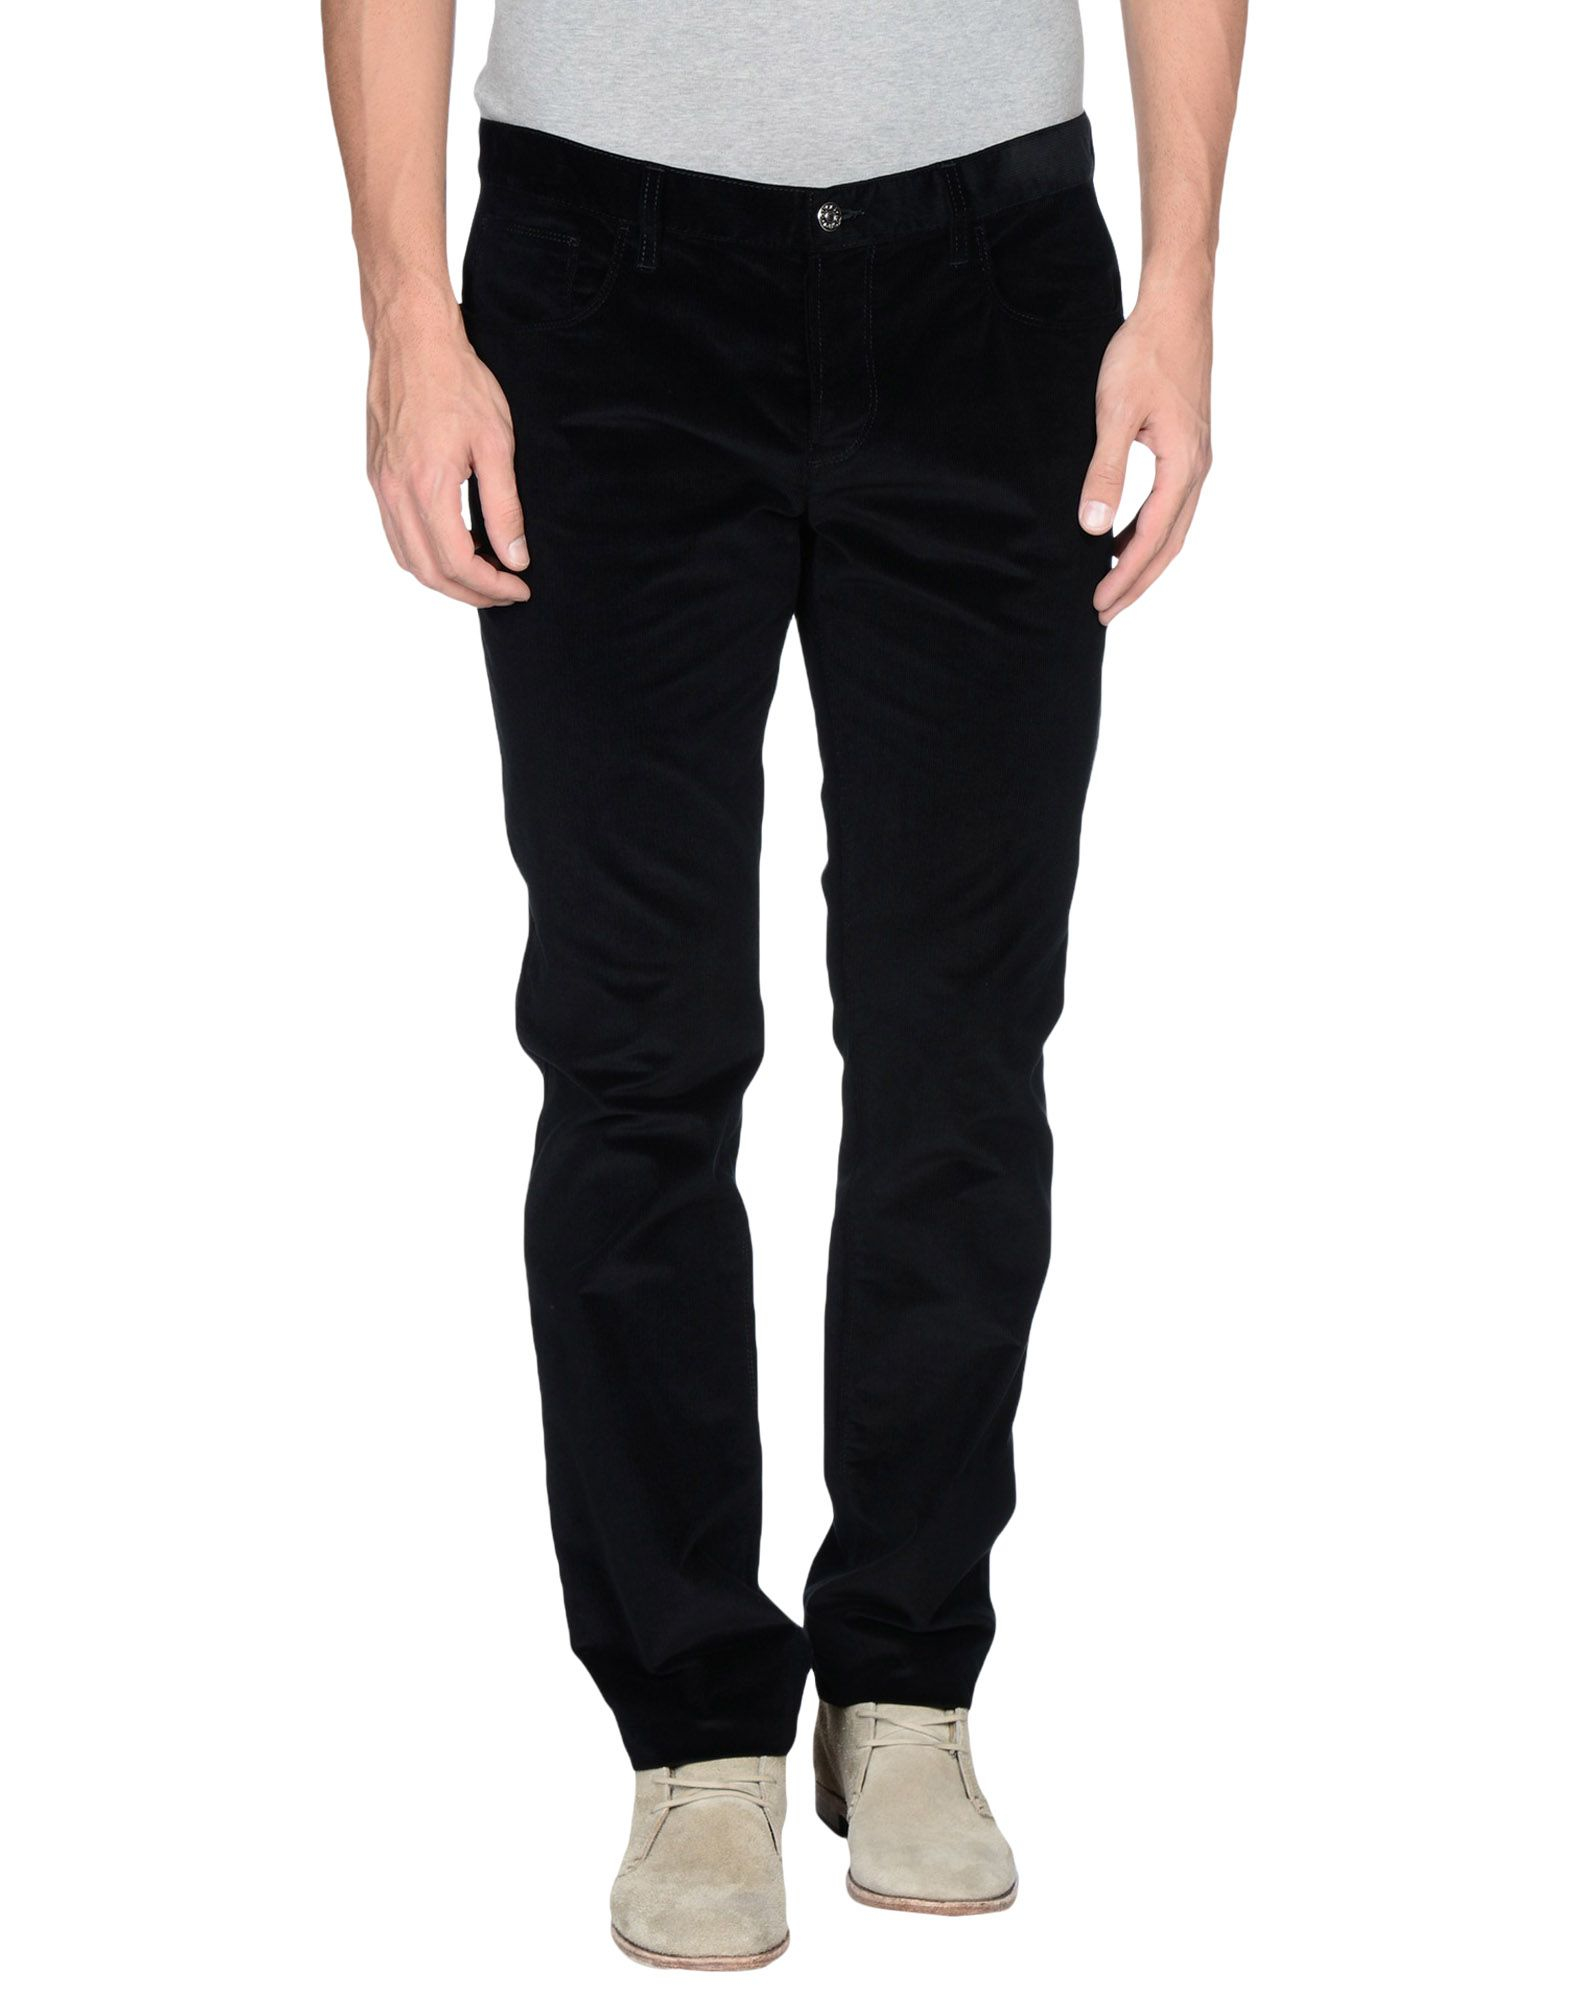 Lyst - Gucci Casual Pants in Black for Men